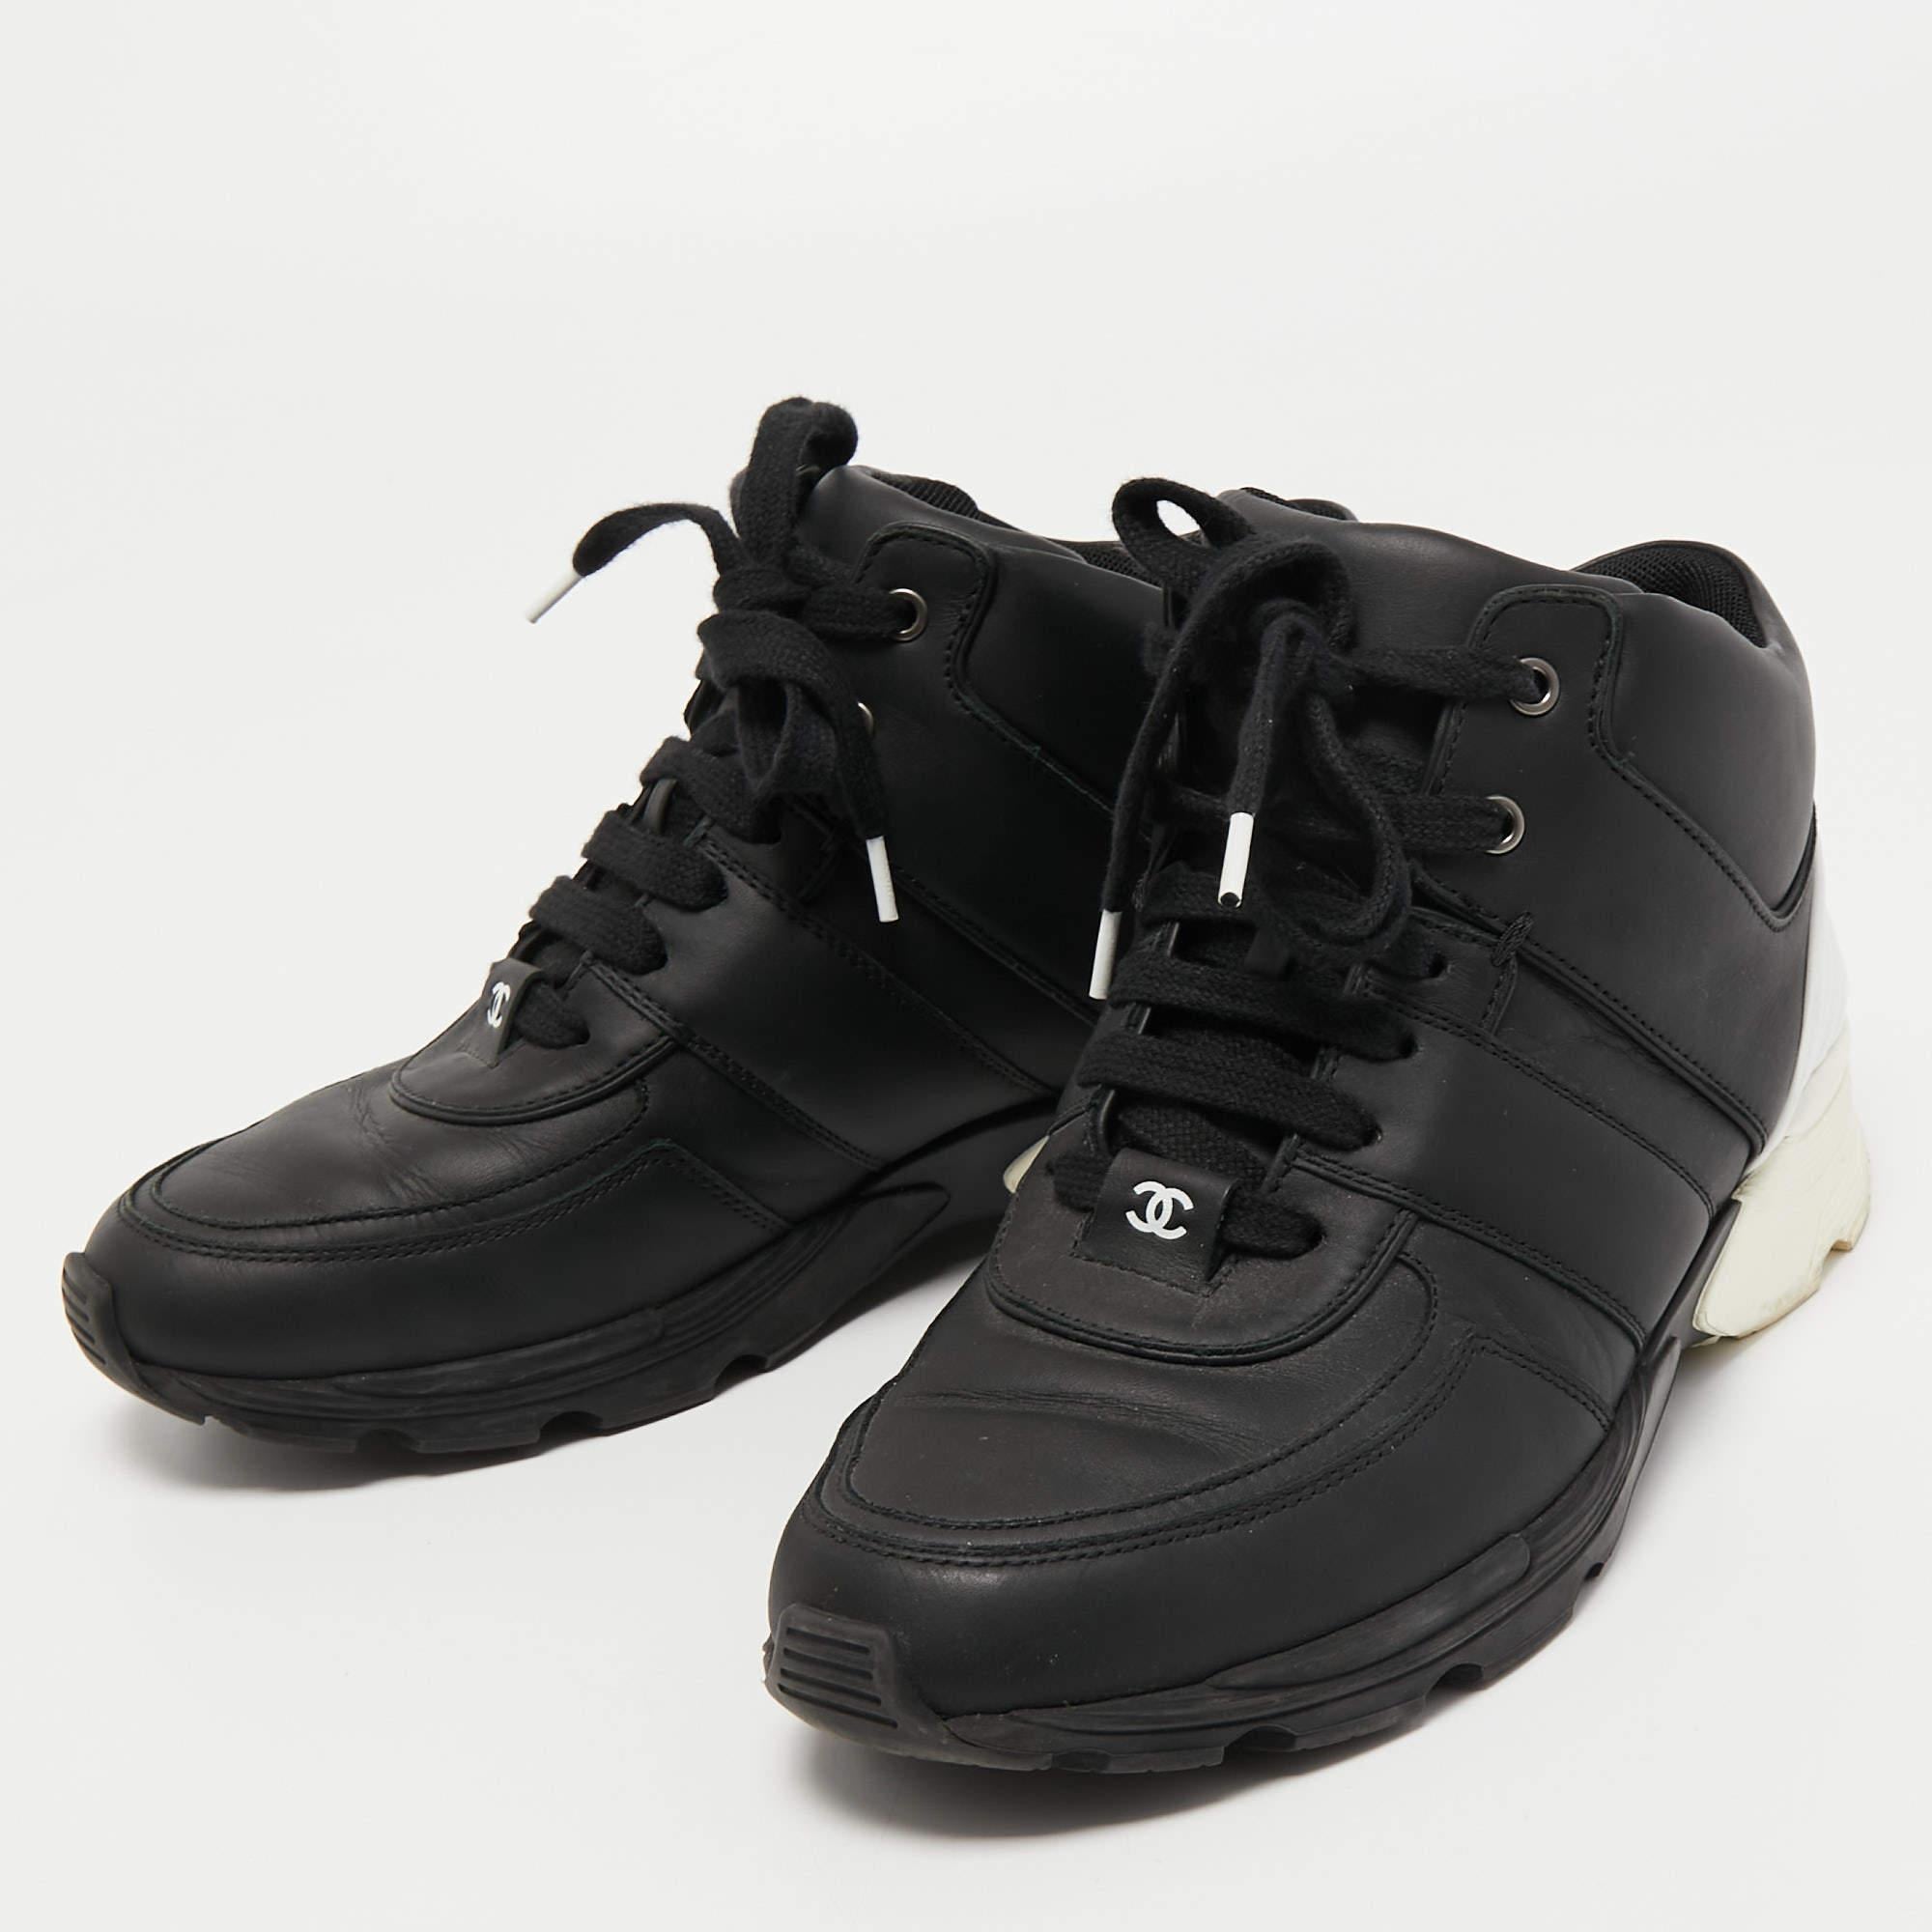 Coming in a classic silhouette, these designer sneakers are a seamless combination of luxury, comfort, and style. These sneakers are finished with signature details and comfortable insoles.

